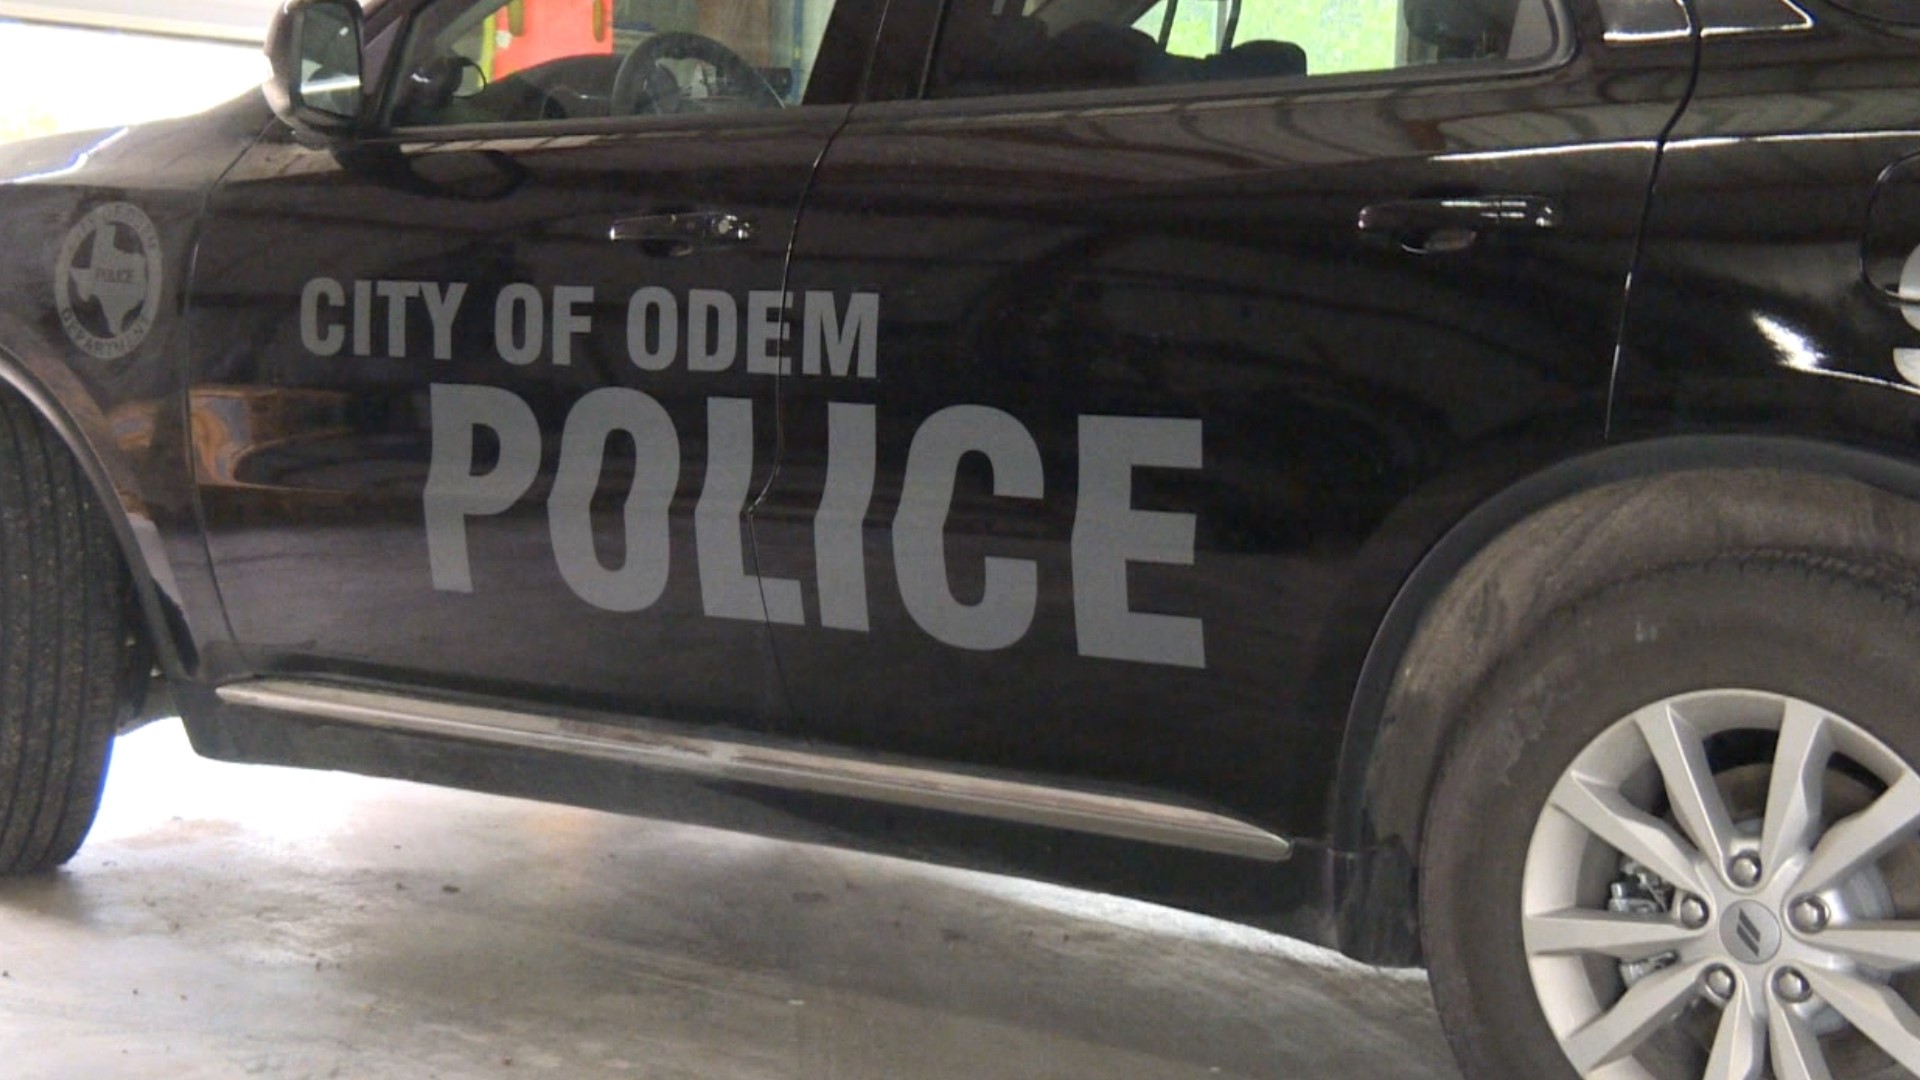 Odem city council will discuss the future of the police force in a meeting Tuesday.